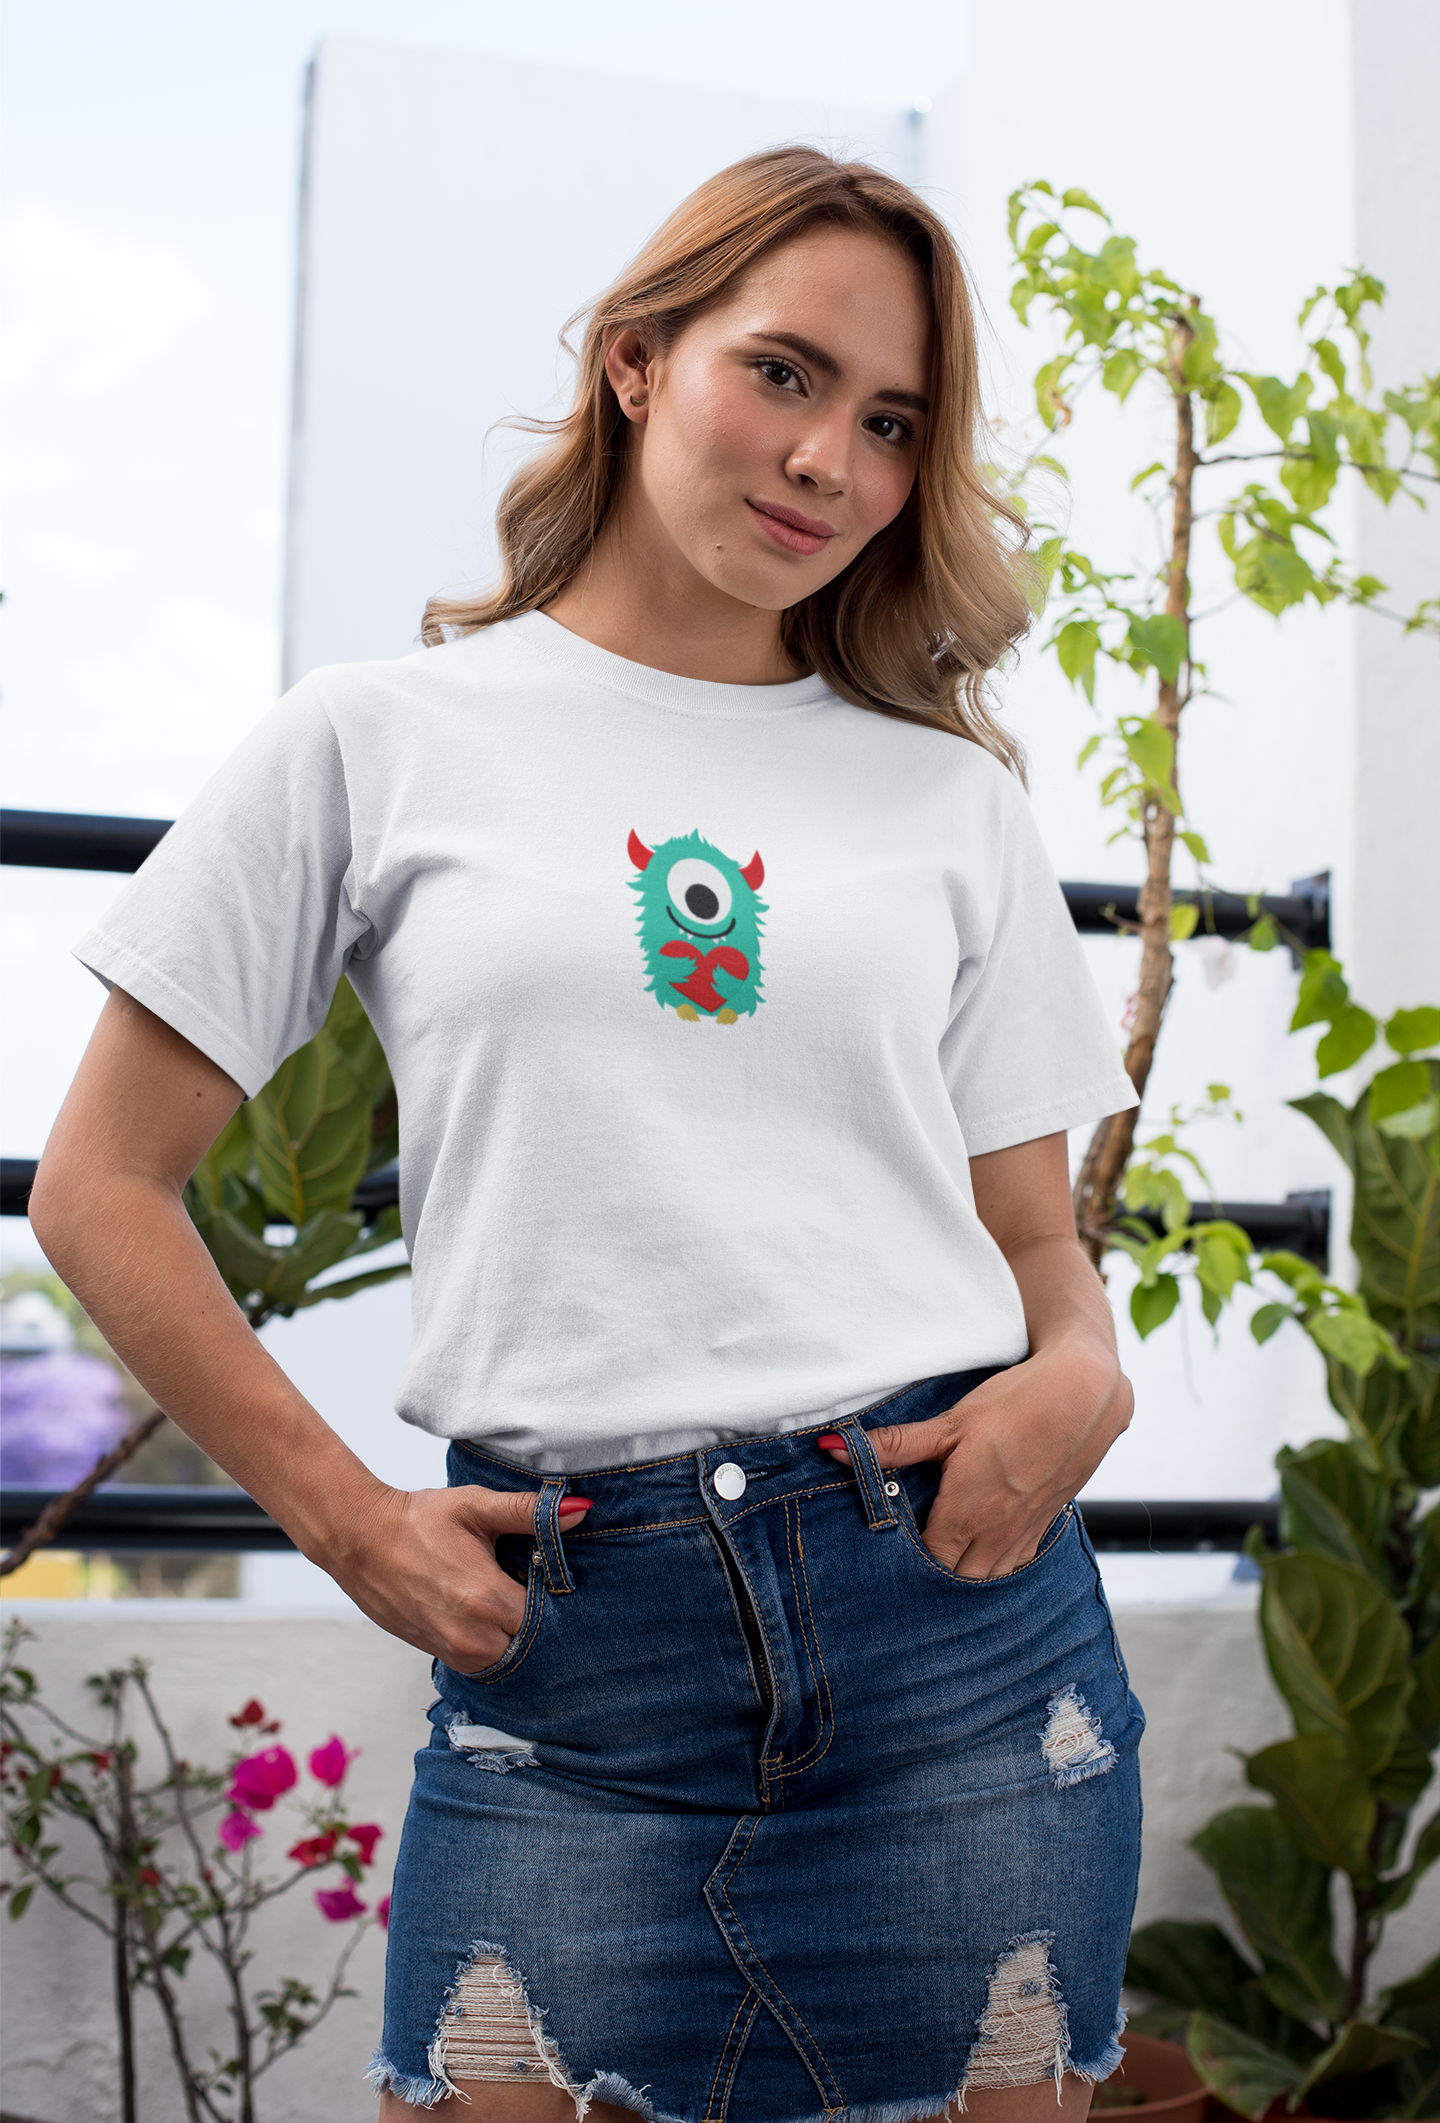 Embroidered t-shirt with Monster design